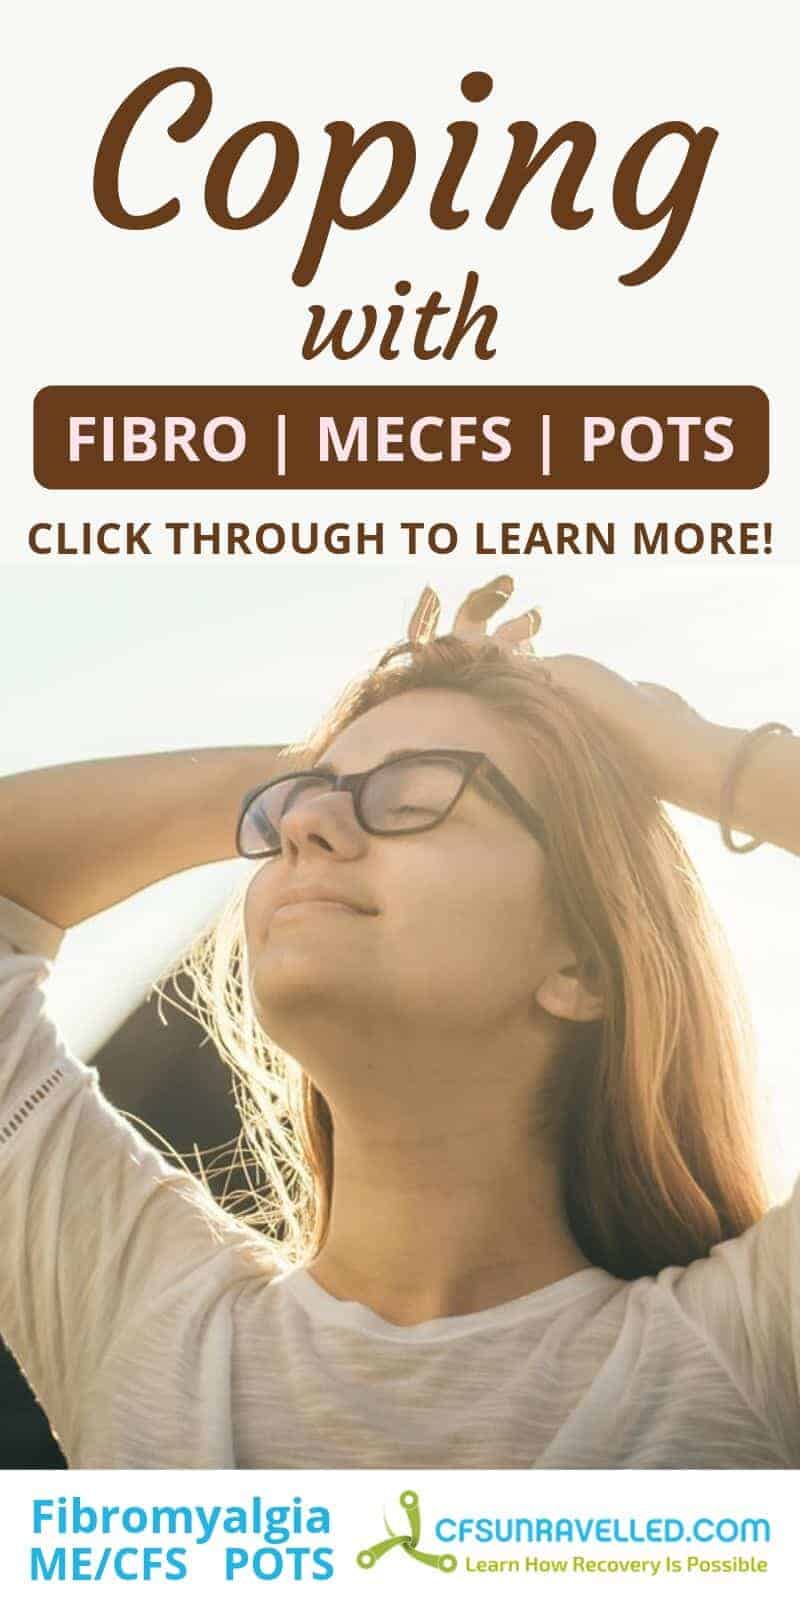 woman with sun behind her with headline about coping with fibro mecfs pots